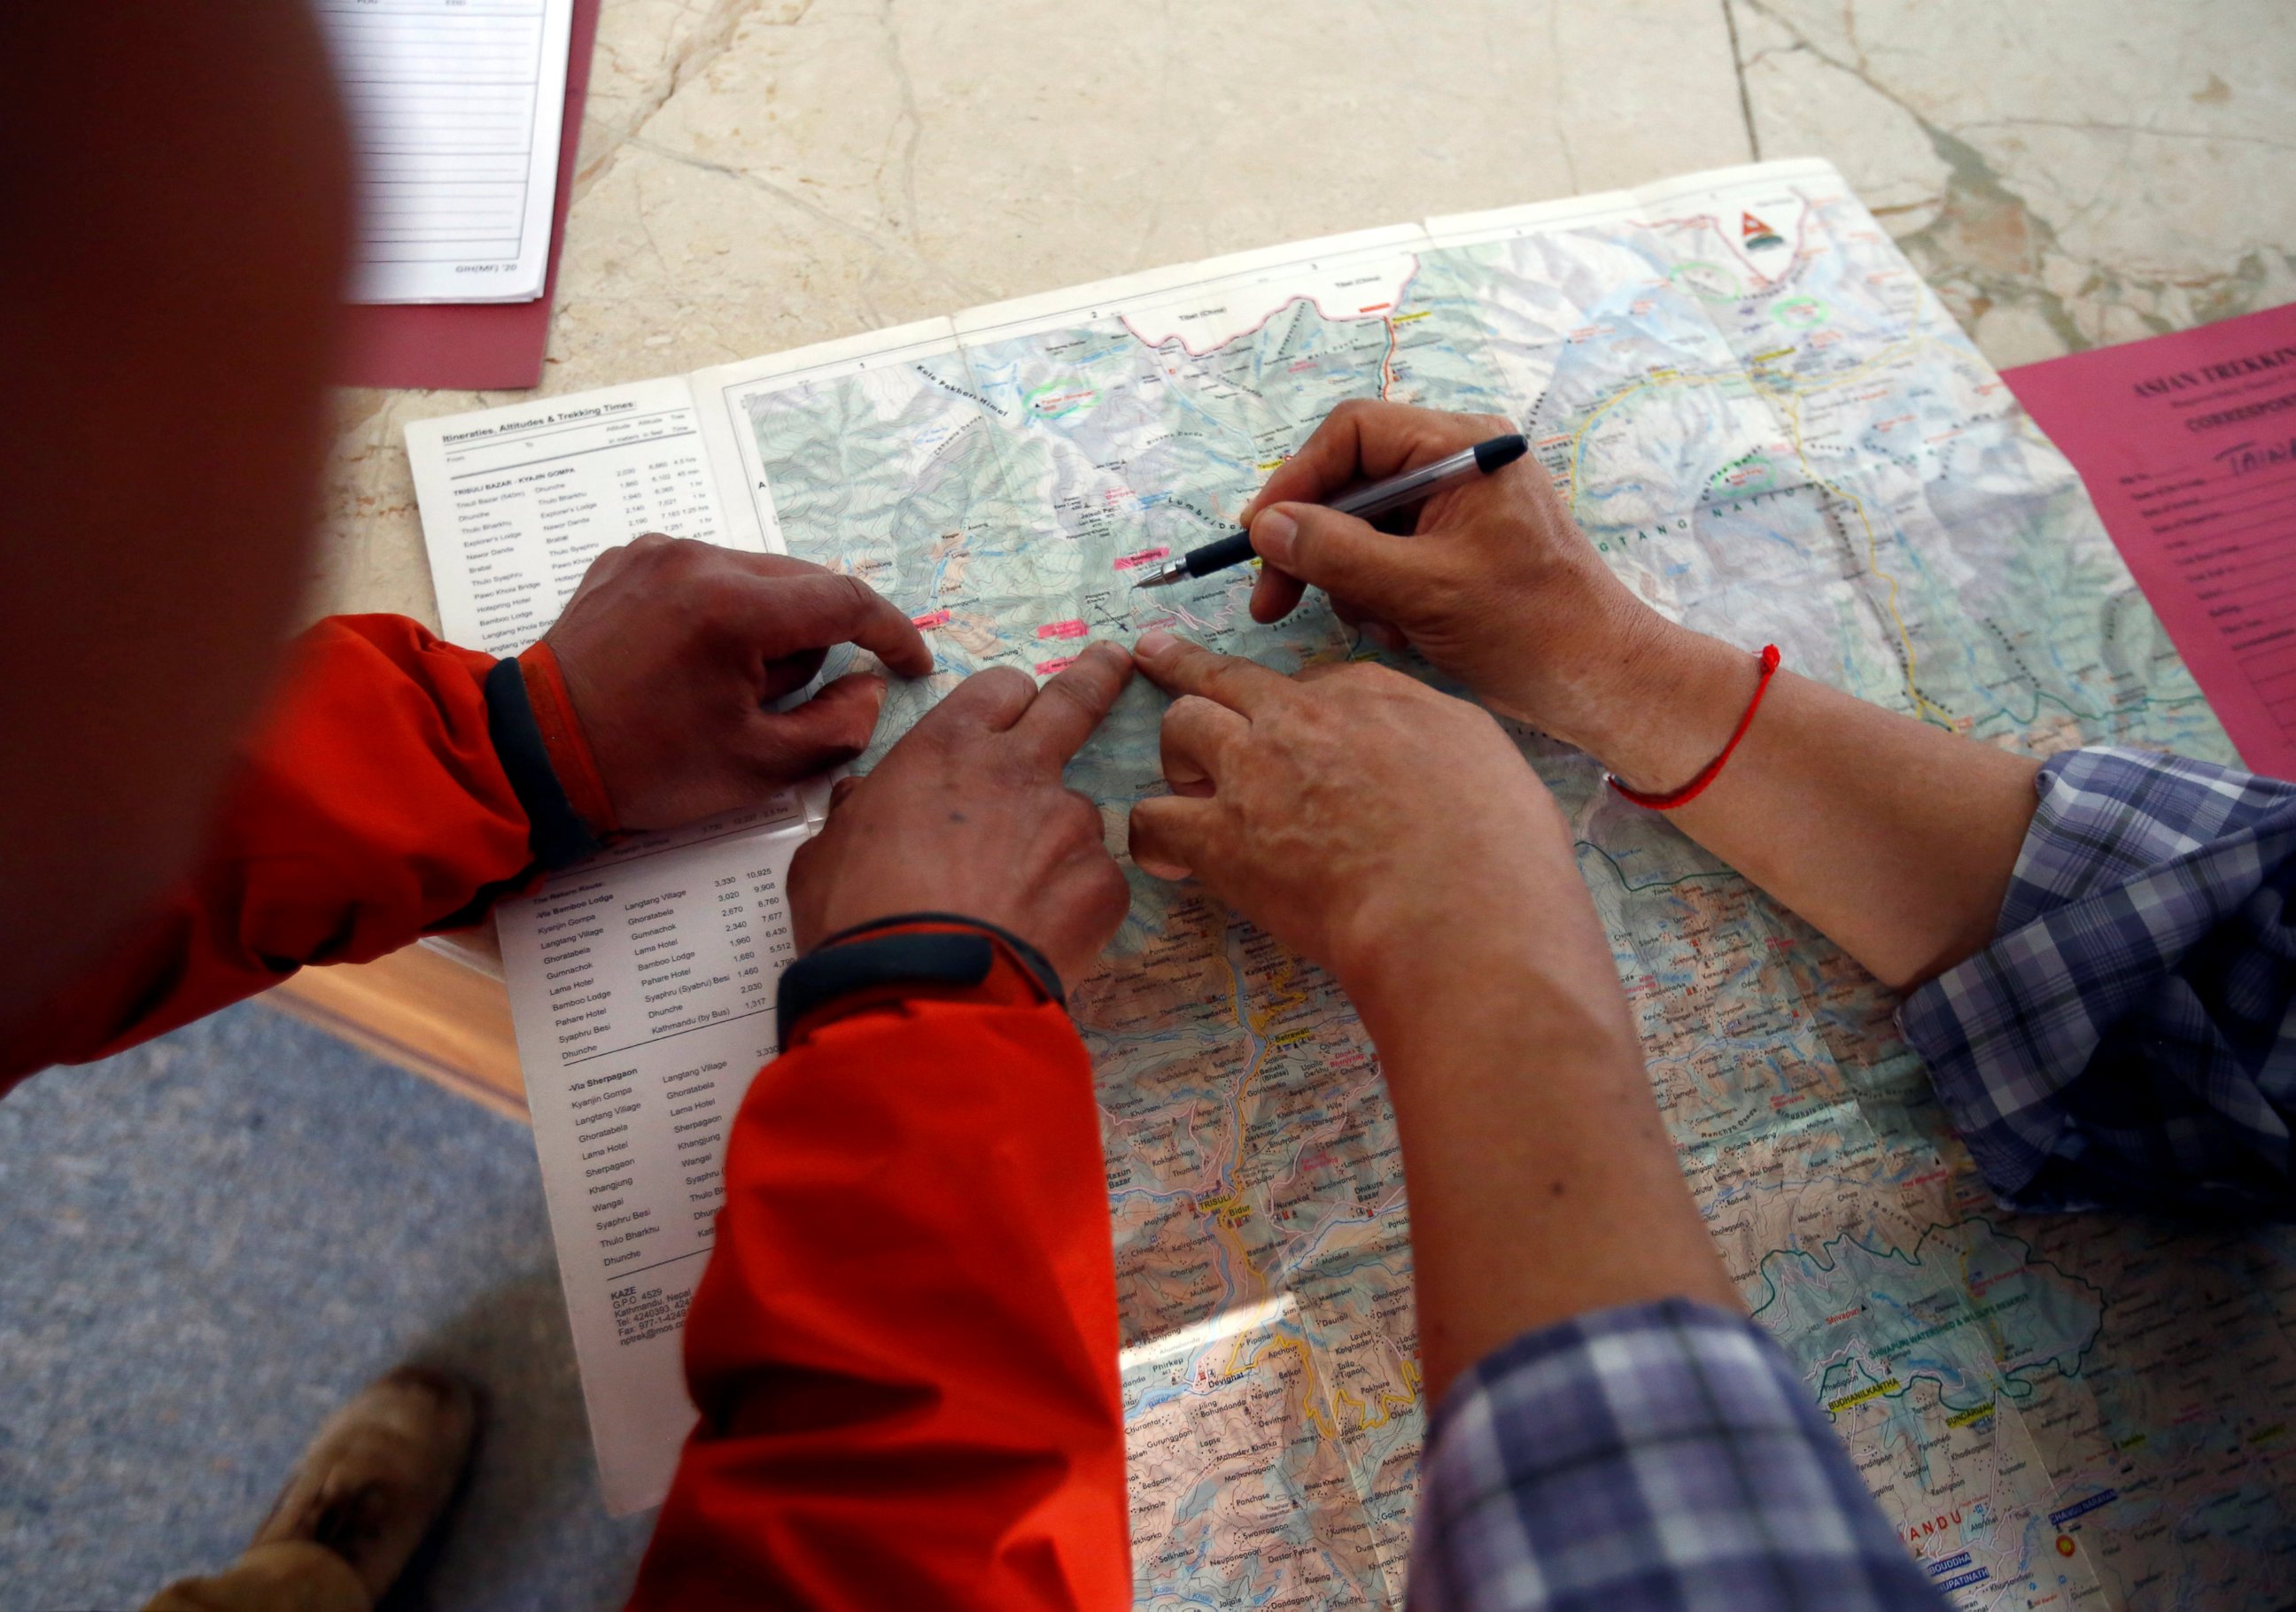 PHOTO: Rescue personnel from Asian Trekking shows the place on the map where Liang Sheng Yueh and Liu Chen Chun were found, in Kathmandu, Nepal, April 26, 2017.